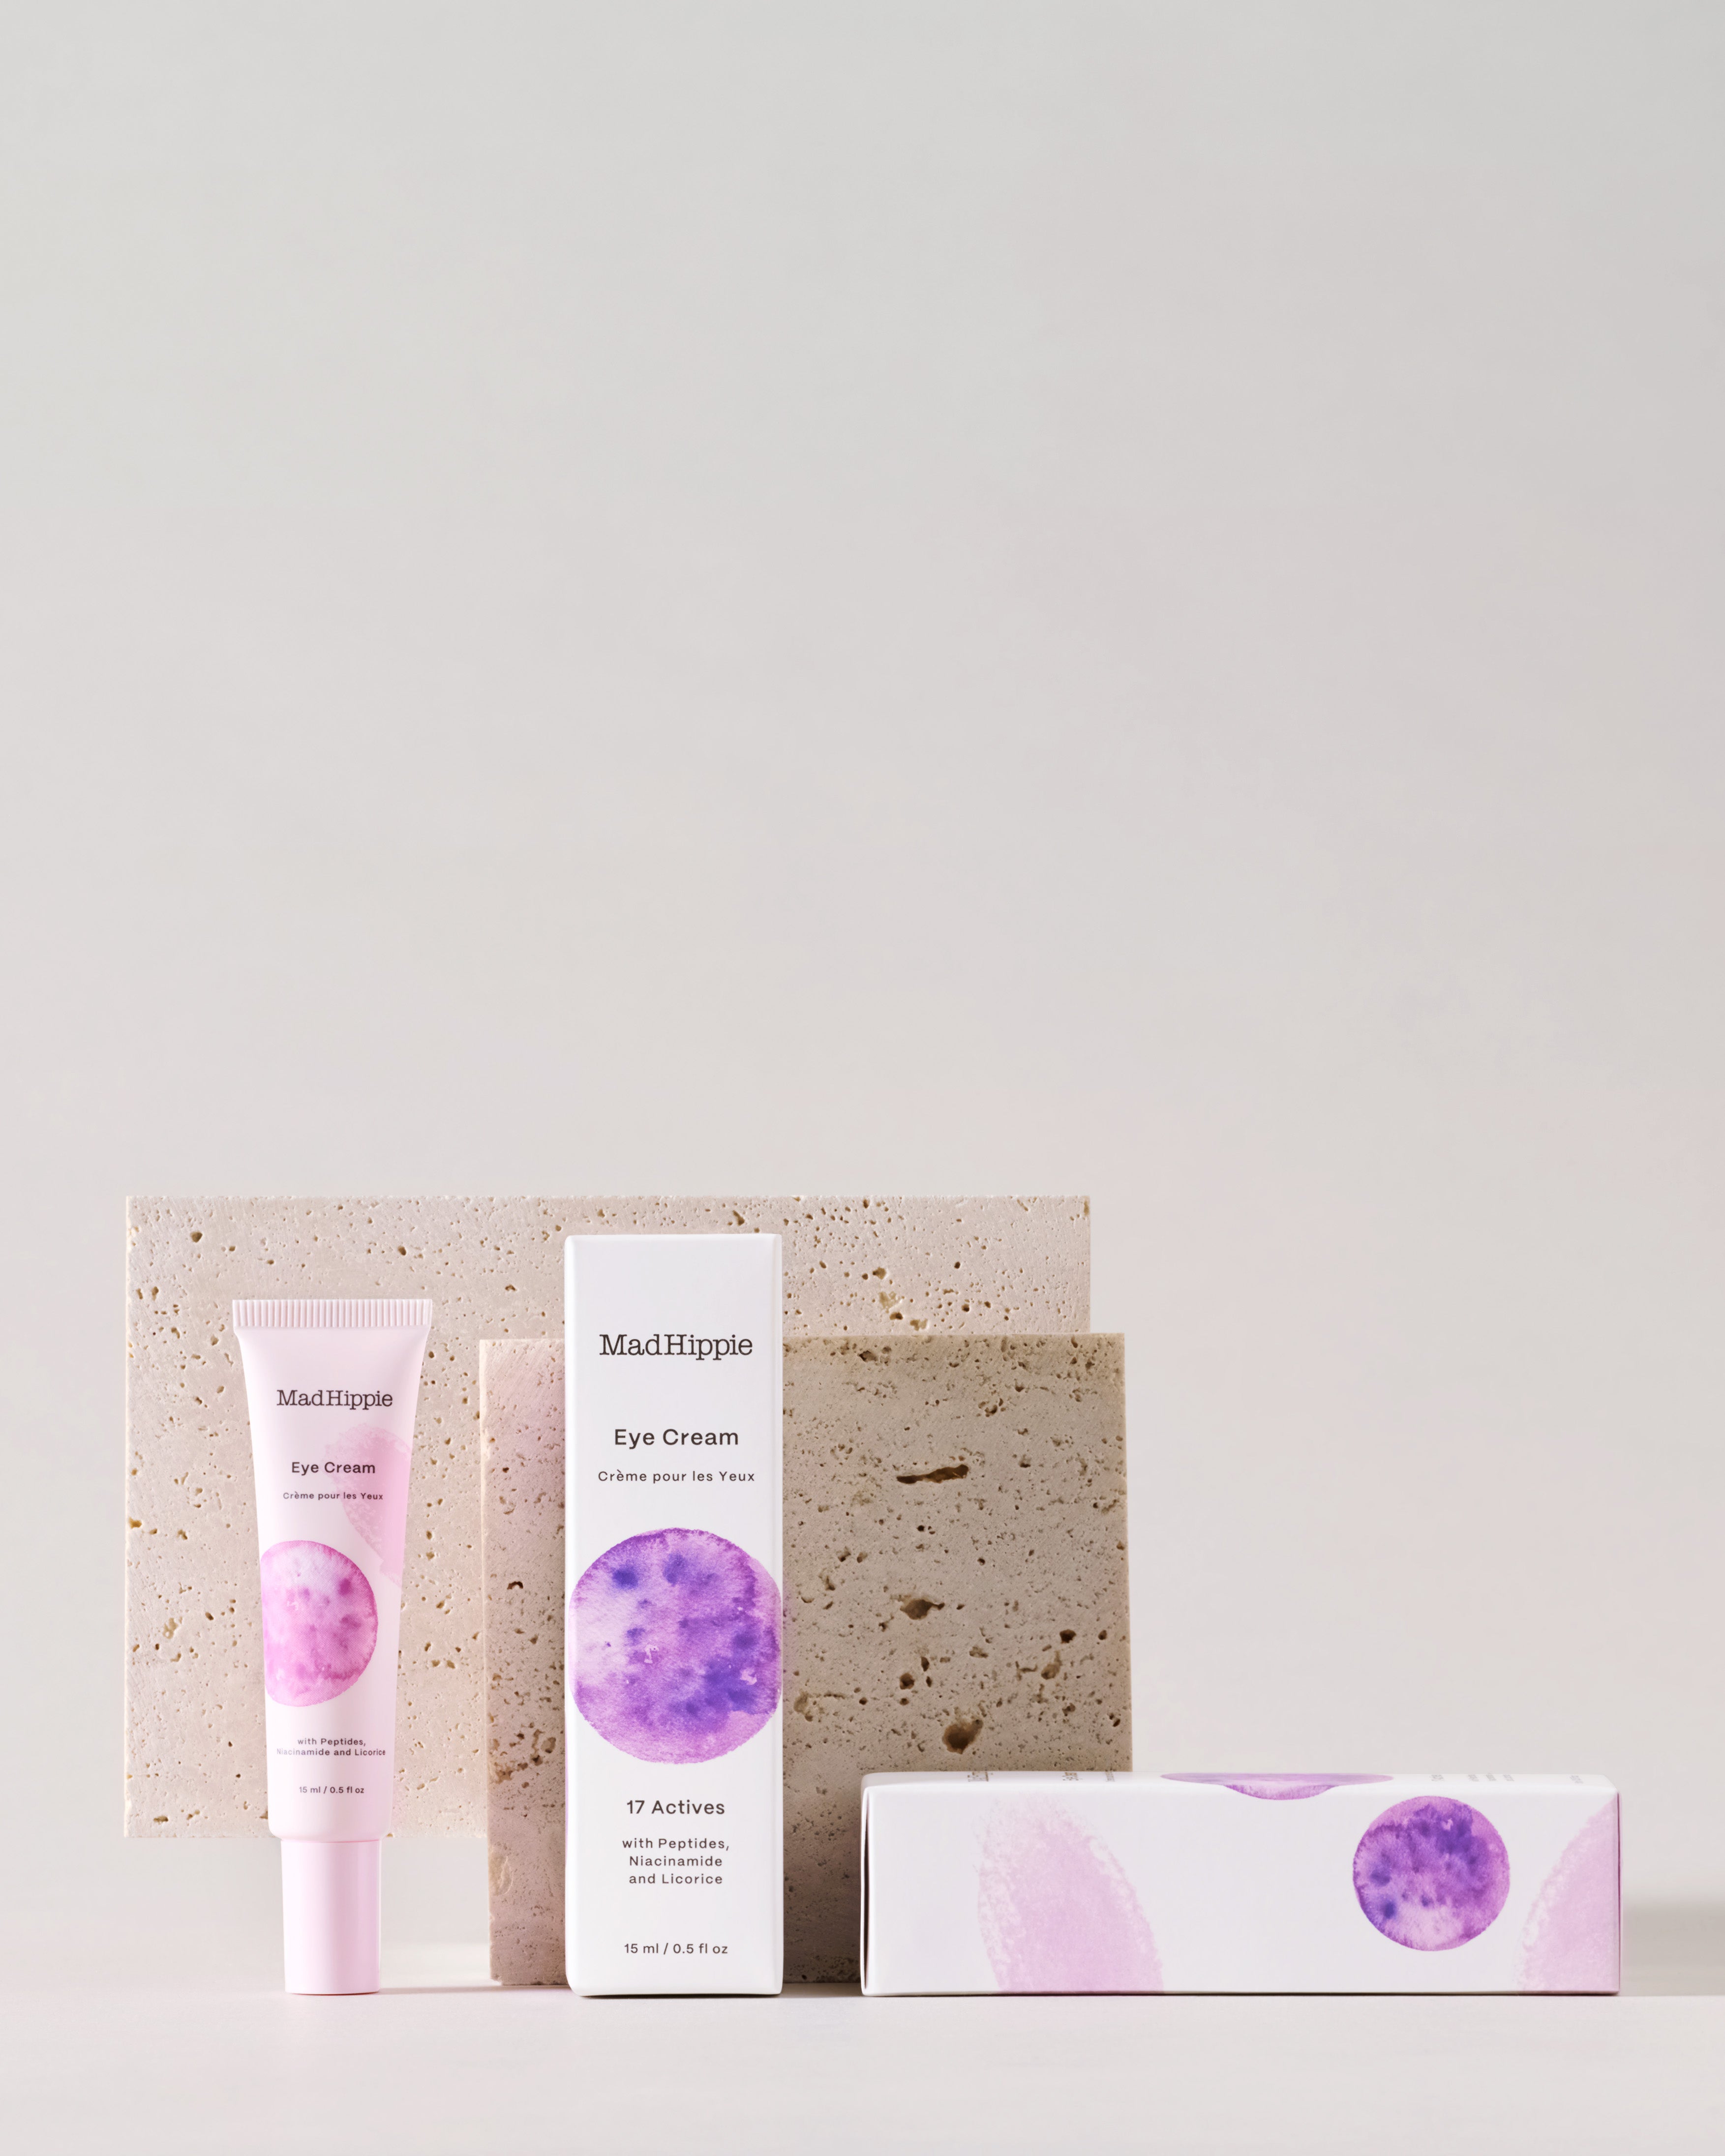 Eye Cream tube + boxes in front of stone slabs, with gray background